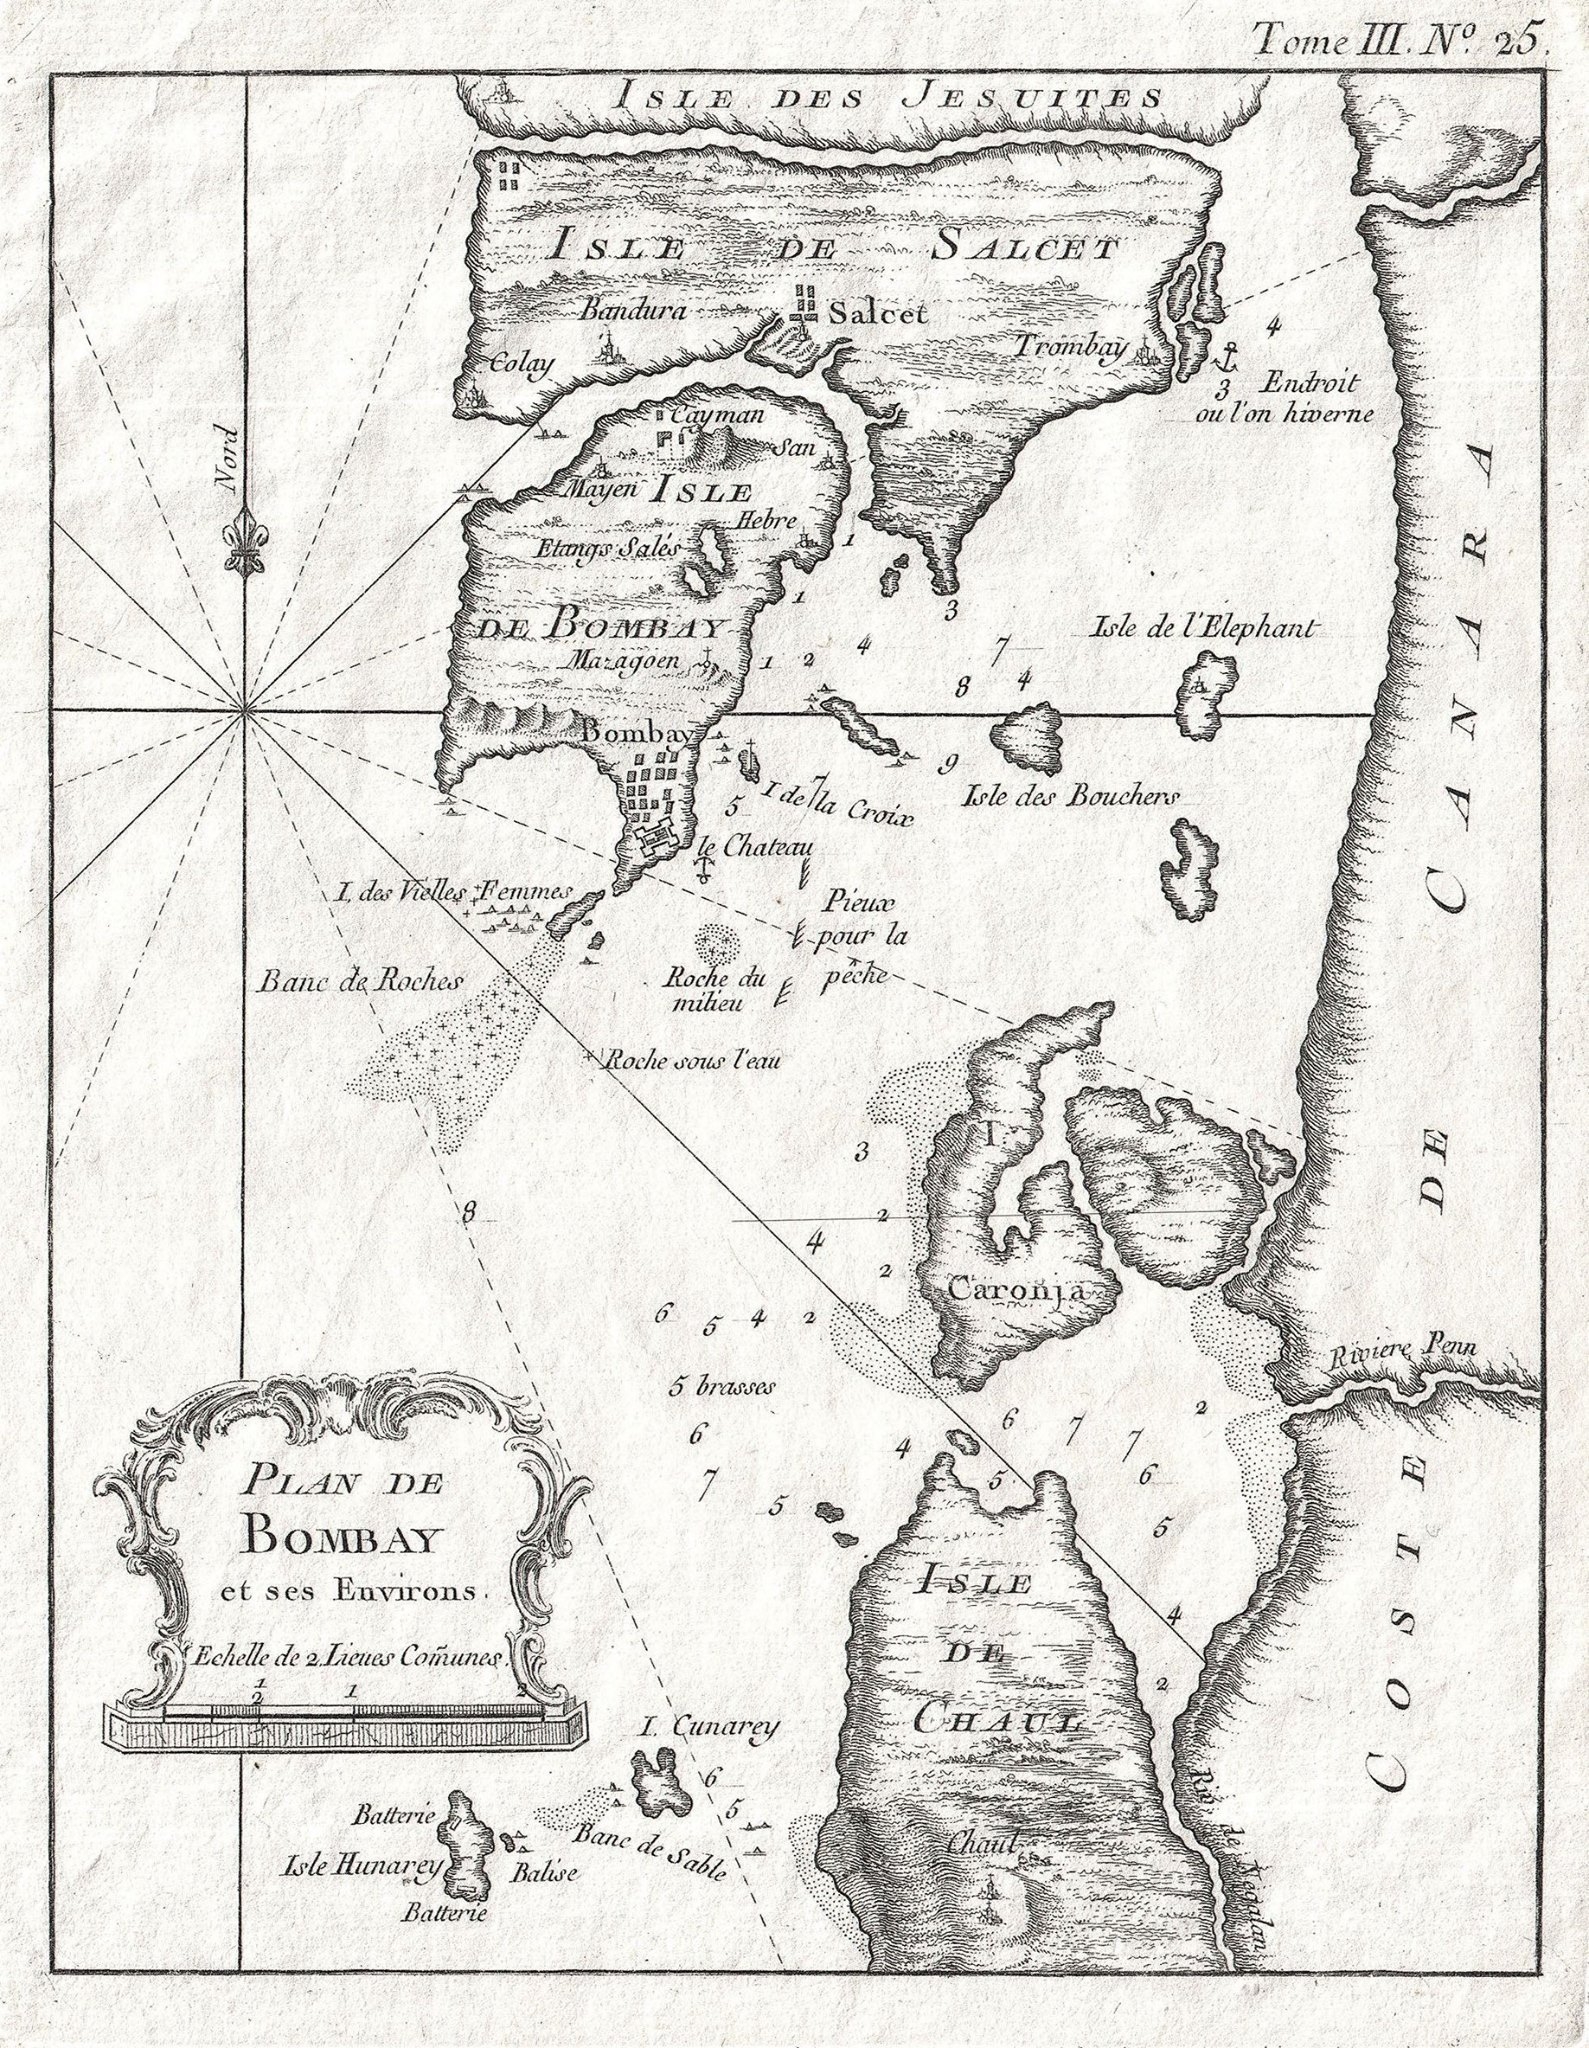 Author's Bellin Map of Bombay (1750)